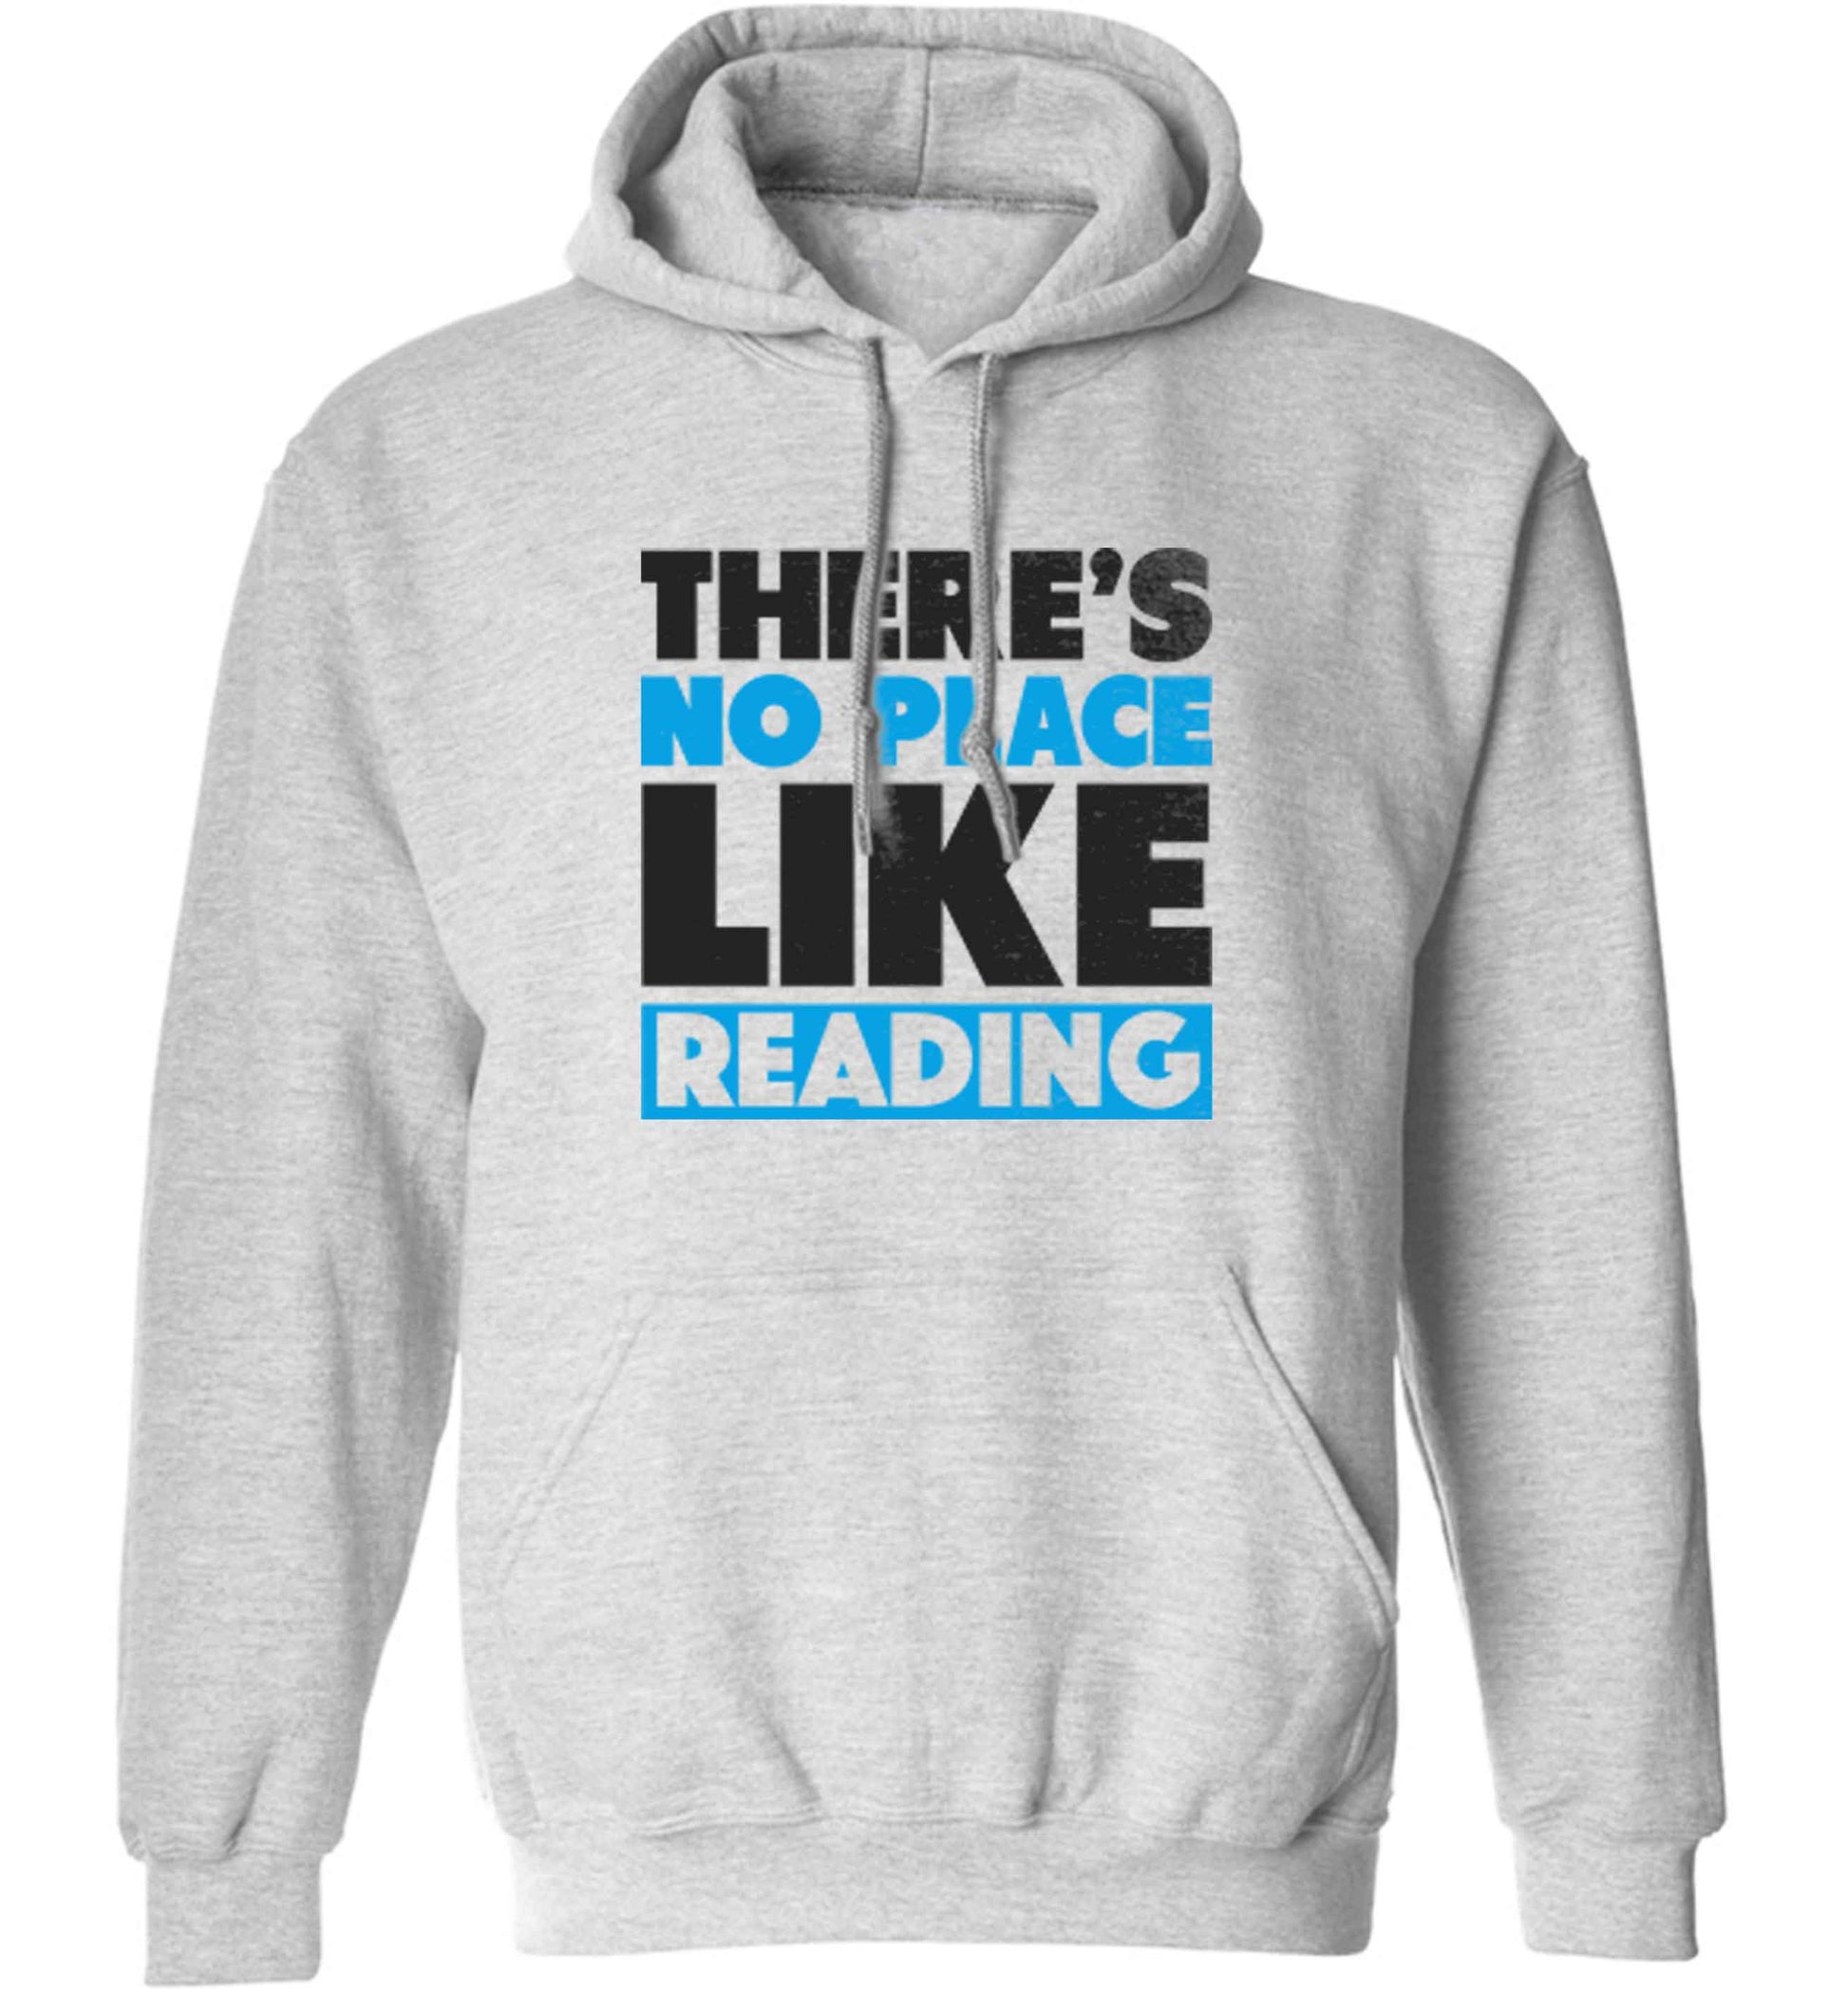 There's no place like Readingadults unisex grey hoodie 2XL